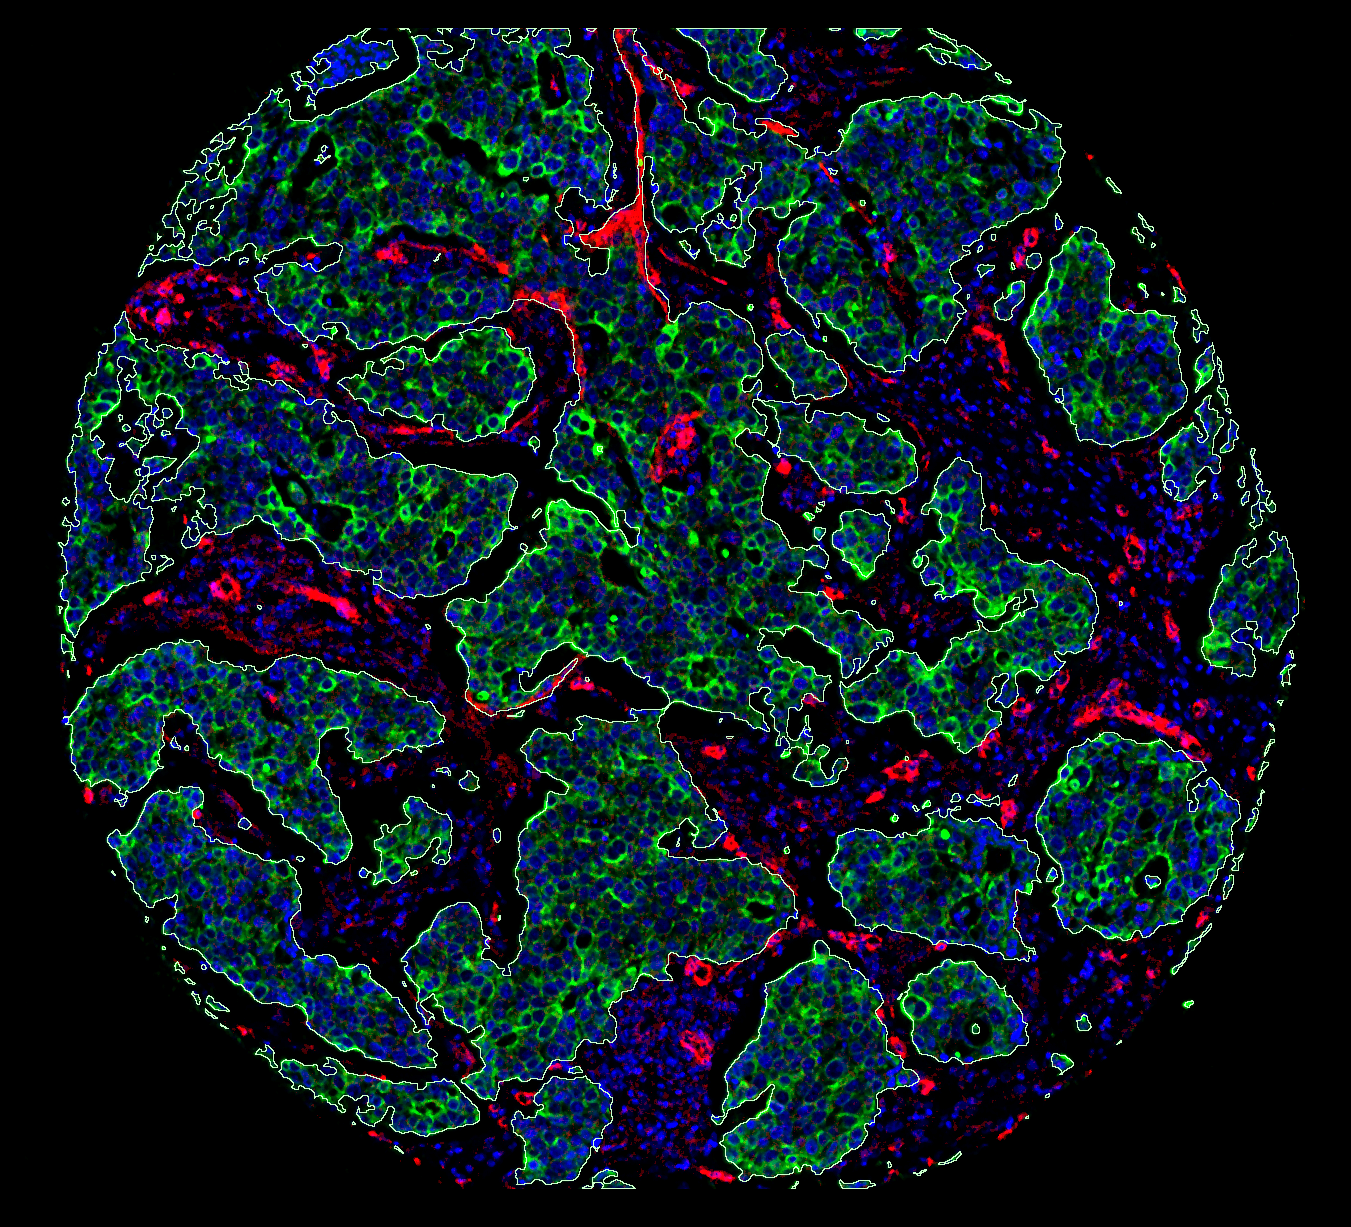 Molecular map of a breast tumour – imaging mass cytometry reveals tumour and stromal areas. Outlines represent the ‘continents’ and ‘islands’ of cancer cells.